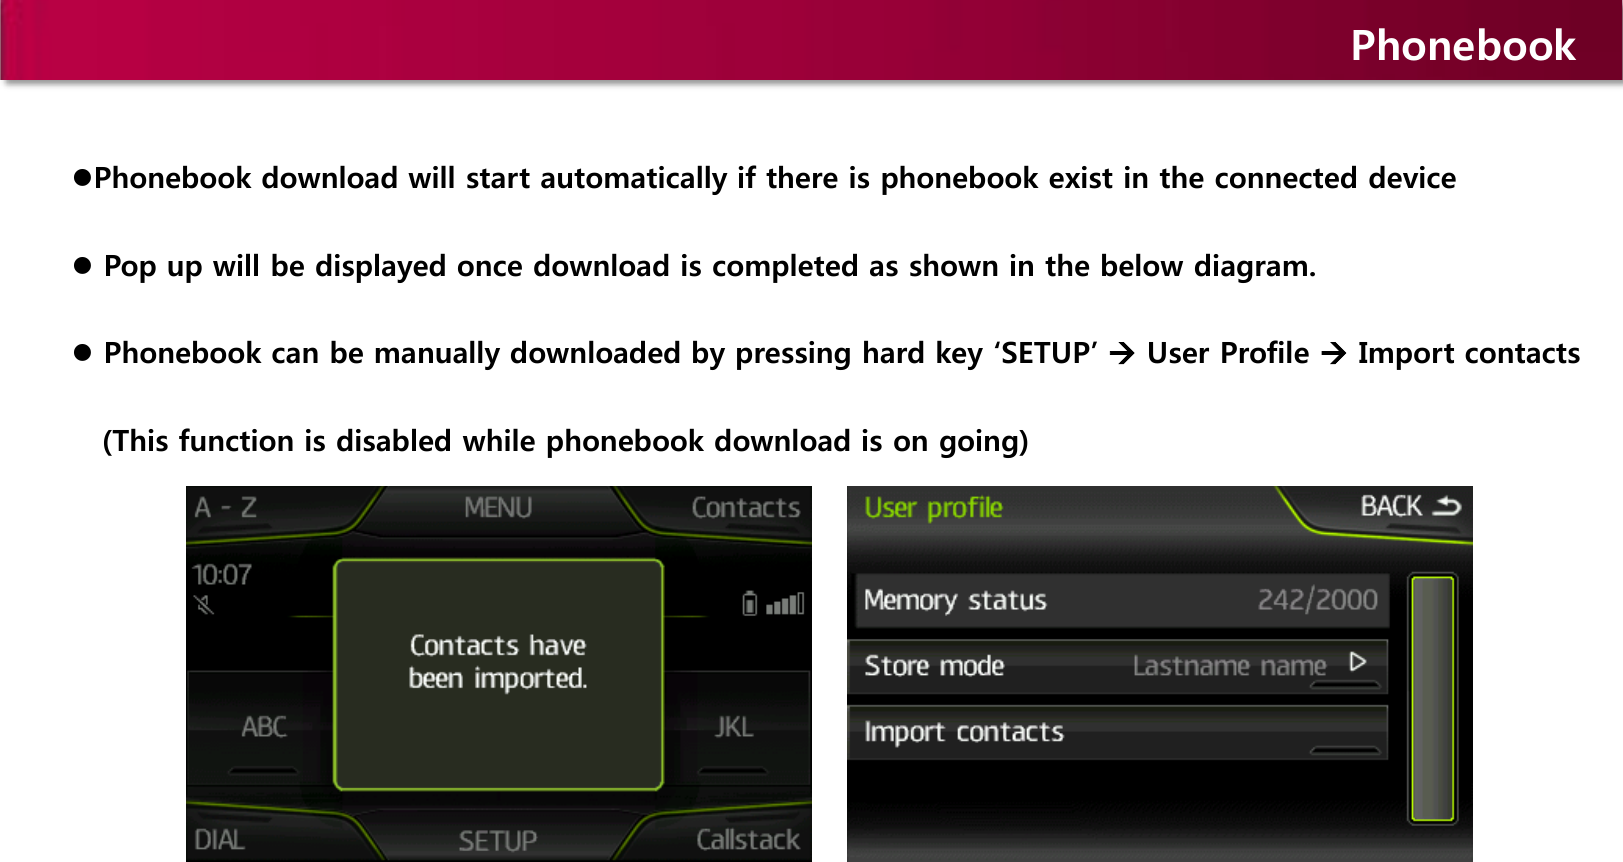 Phonebook Phonebook download will start automatically if there is phonebook exist in the connected device  Pop up will be displayed once download is completed as shown in the below diagram.  Phonebook can be manually downloaded by pressing hard key ‘SETUP’  User Profile  Import contacts    (This function is disabled while phonebook download is on going) 